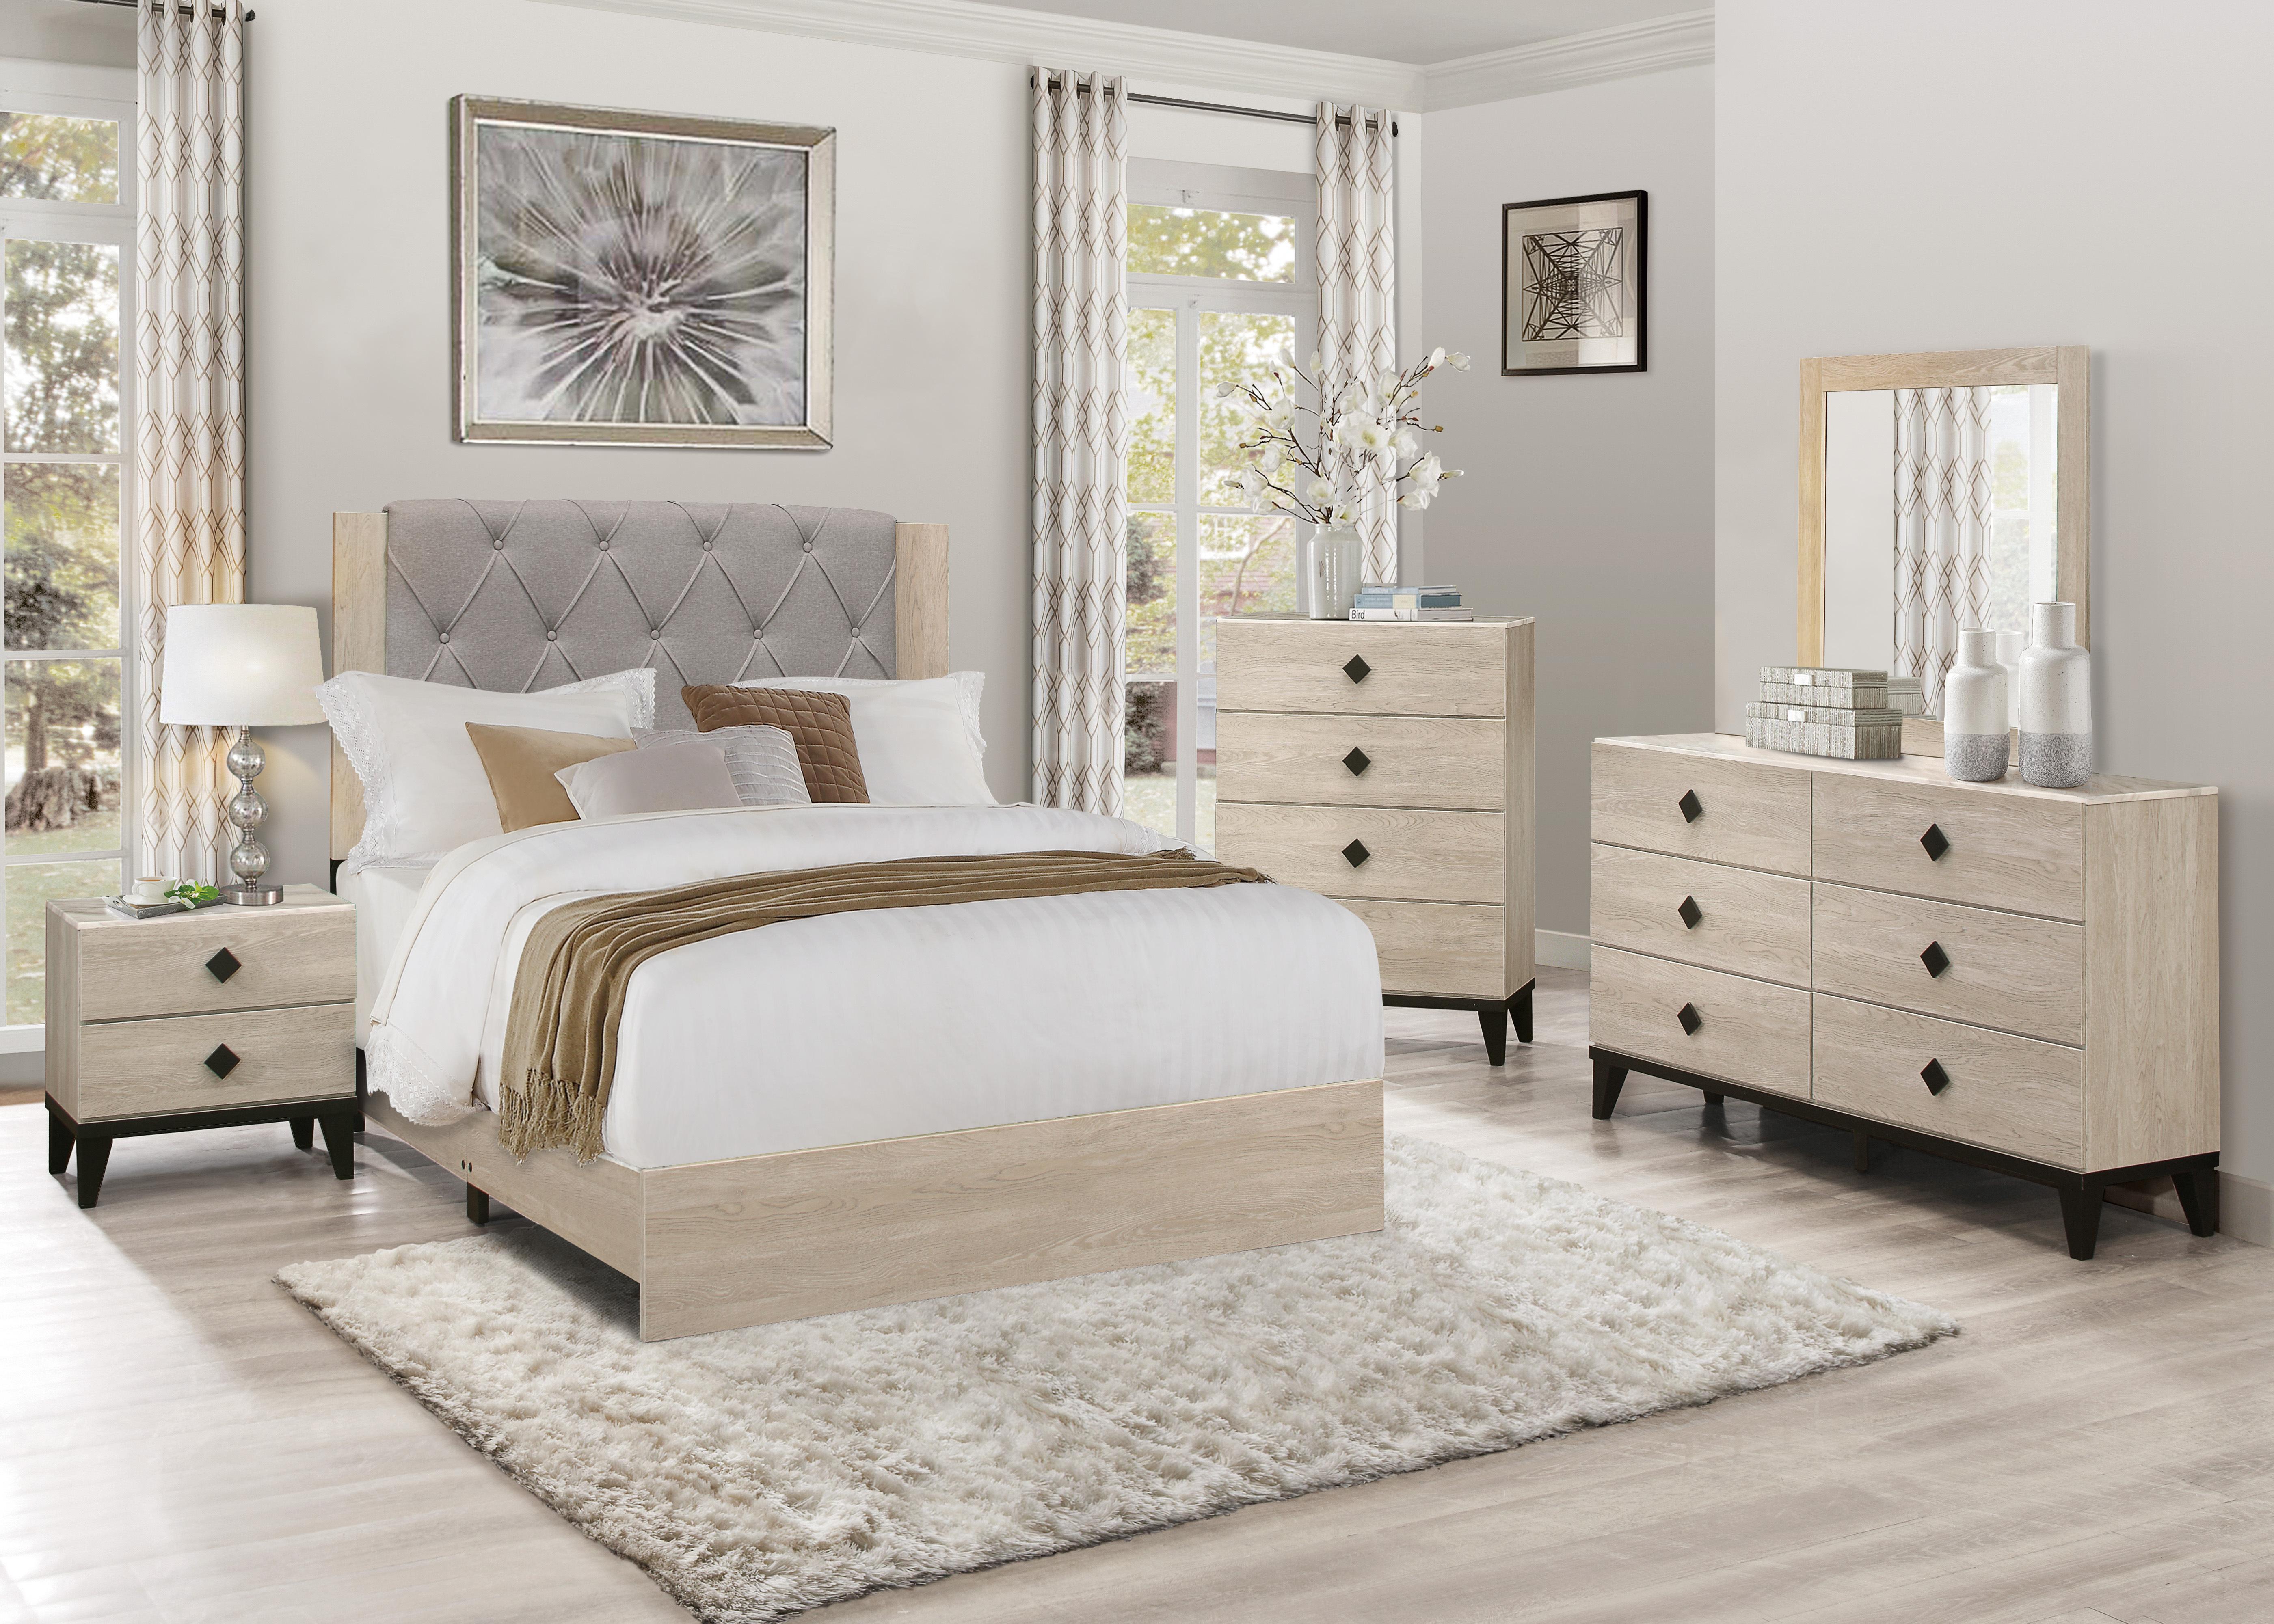 Modern Bedroom Set 1524F-1-5PC Whiting 1524F-1-5PC in Cream Polyester